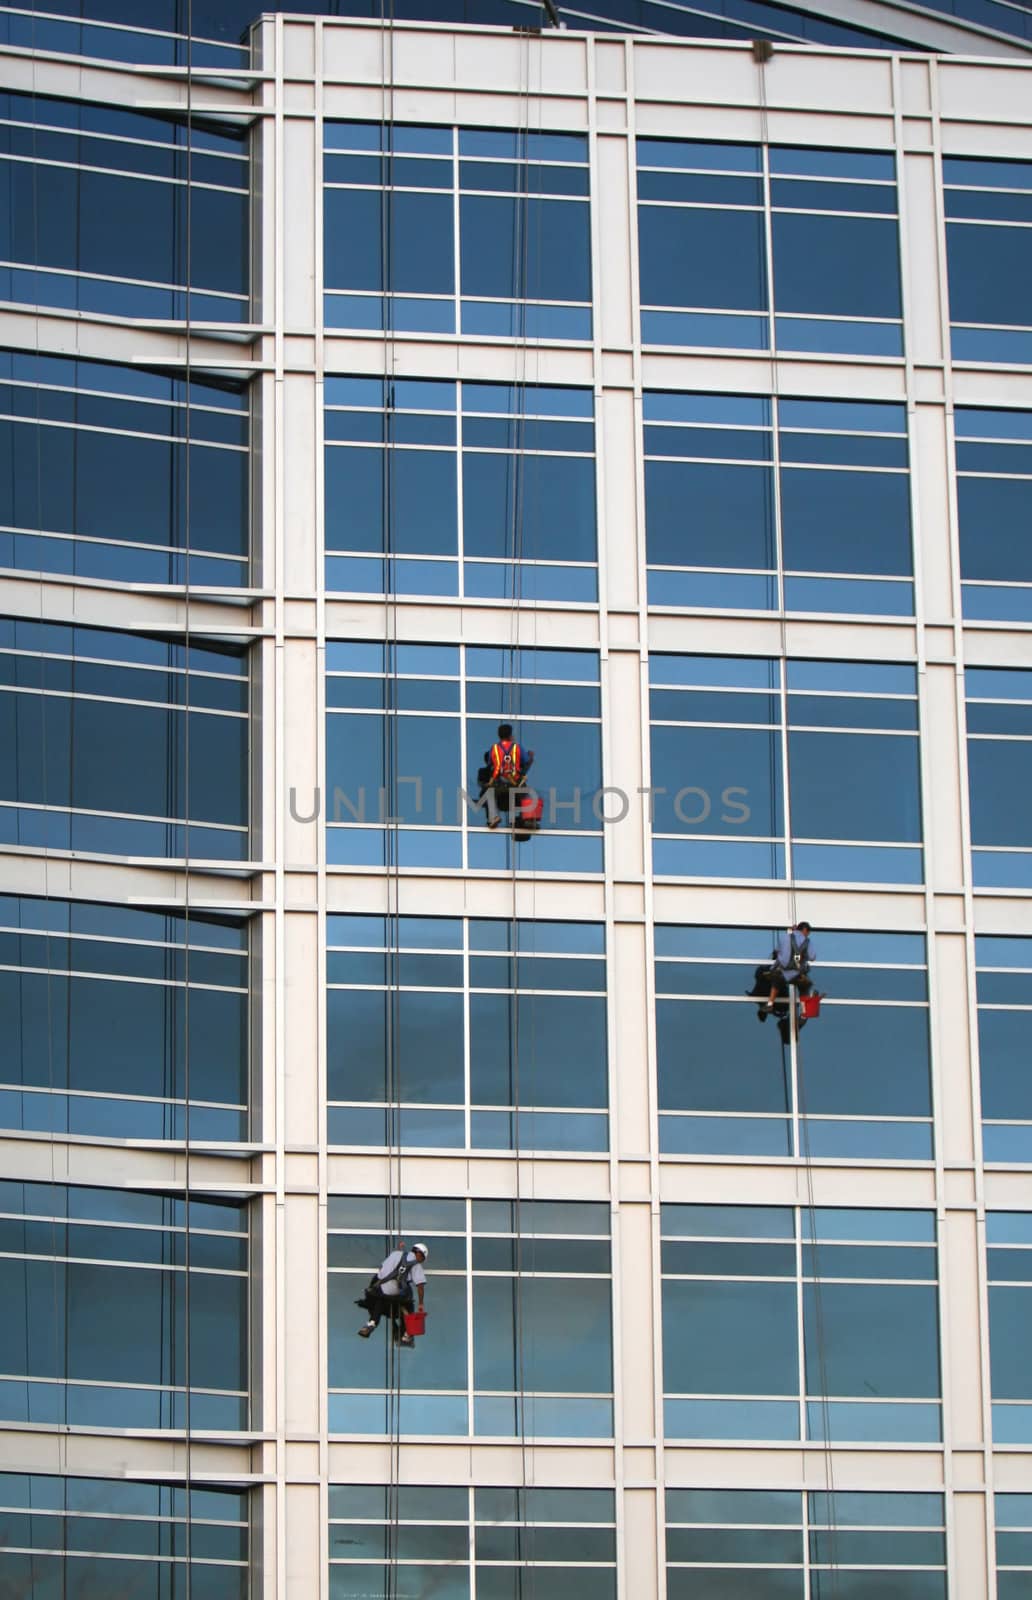 Three window washers descend on ropes high above the city. The building is a very modern glass structure.